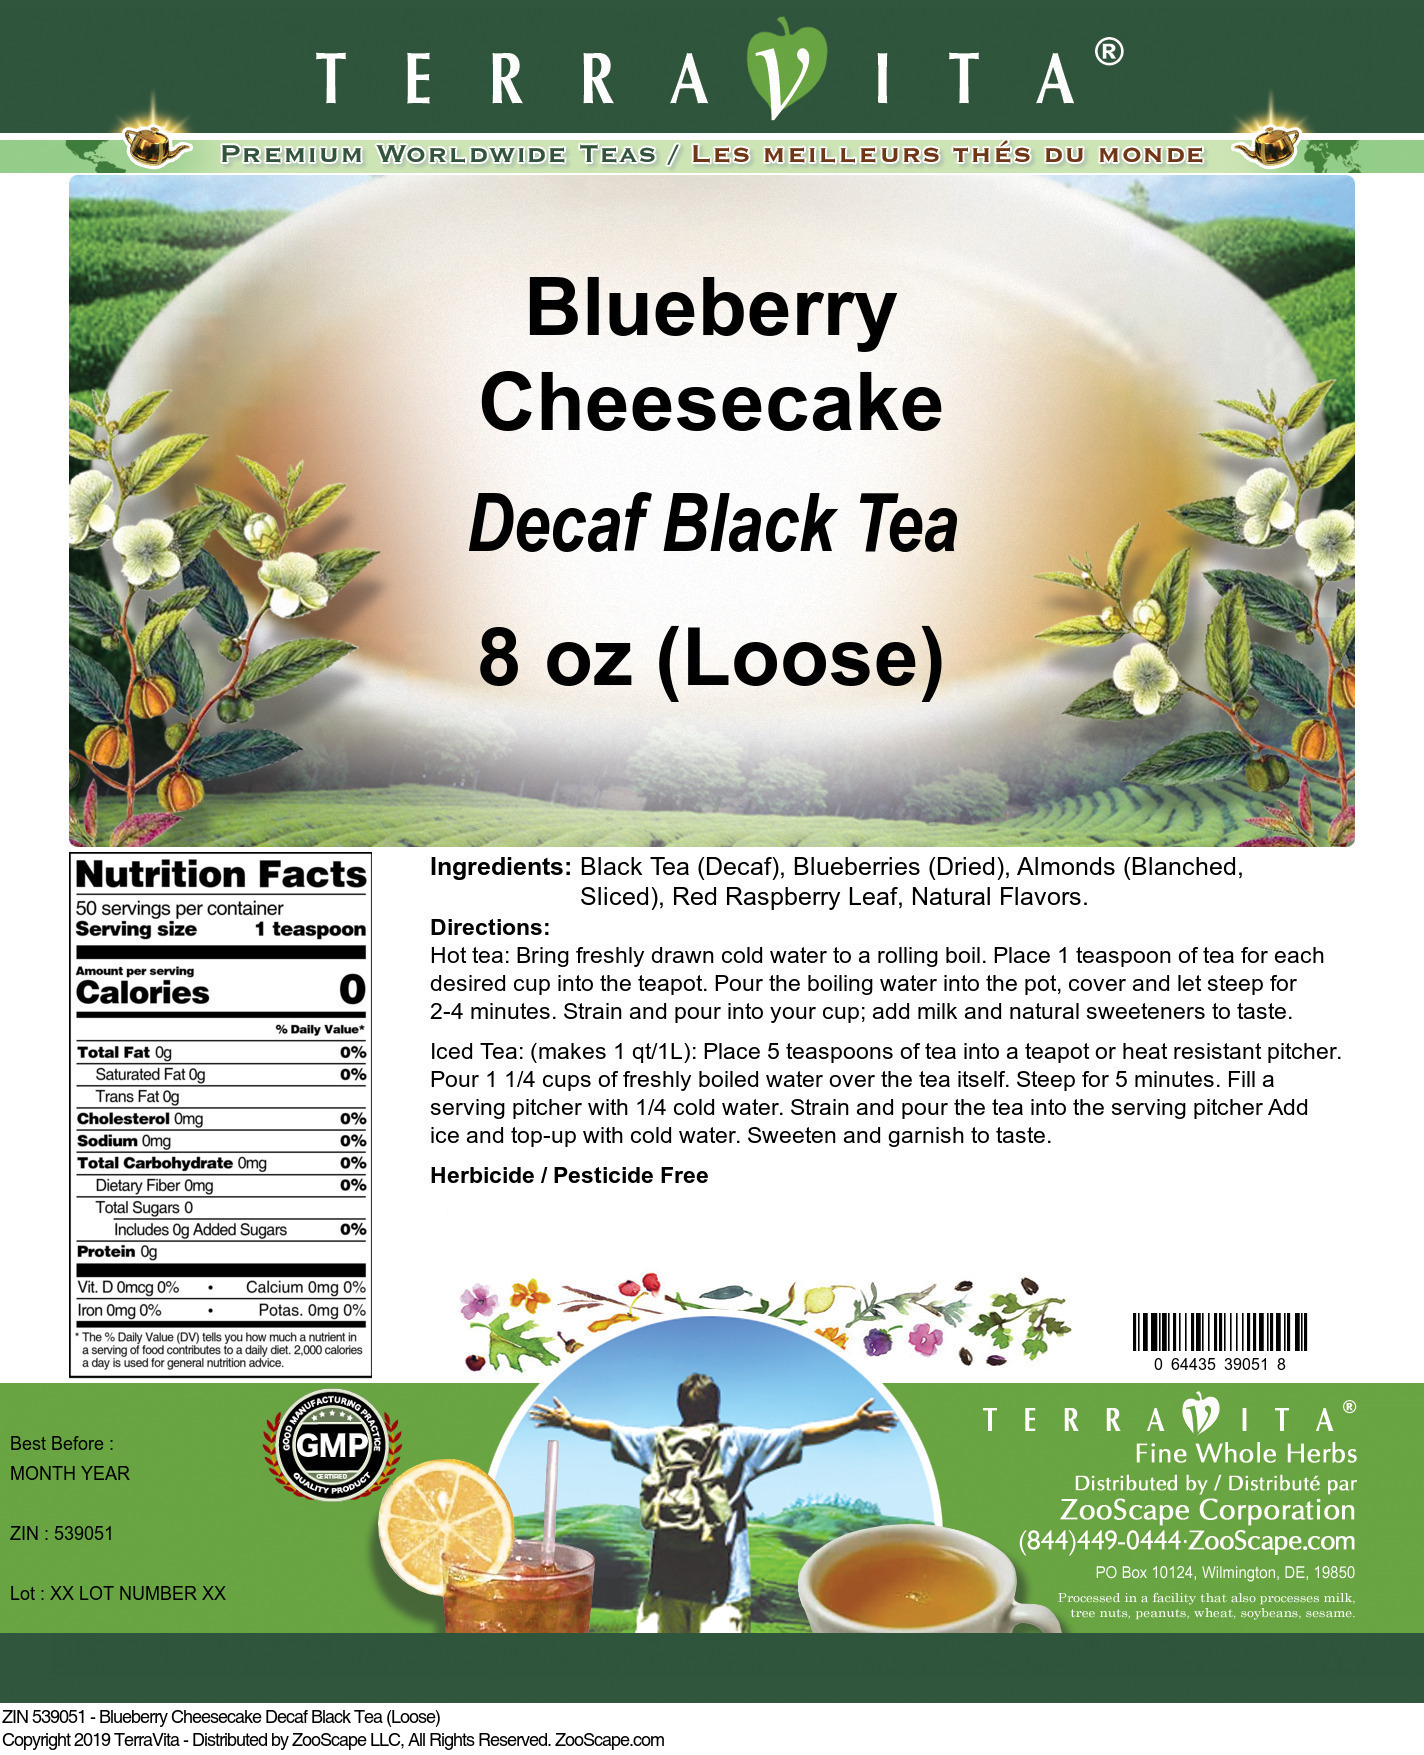 Blueberry Cheesecake Decaf Black Tea (Loose) - Label